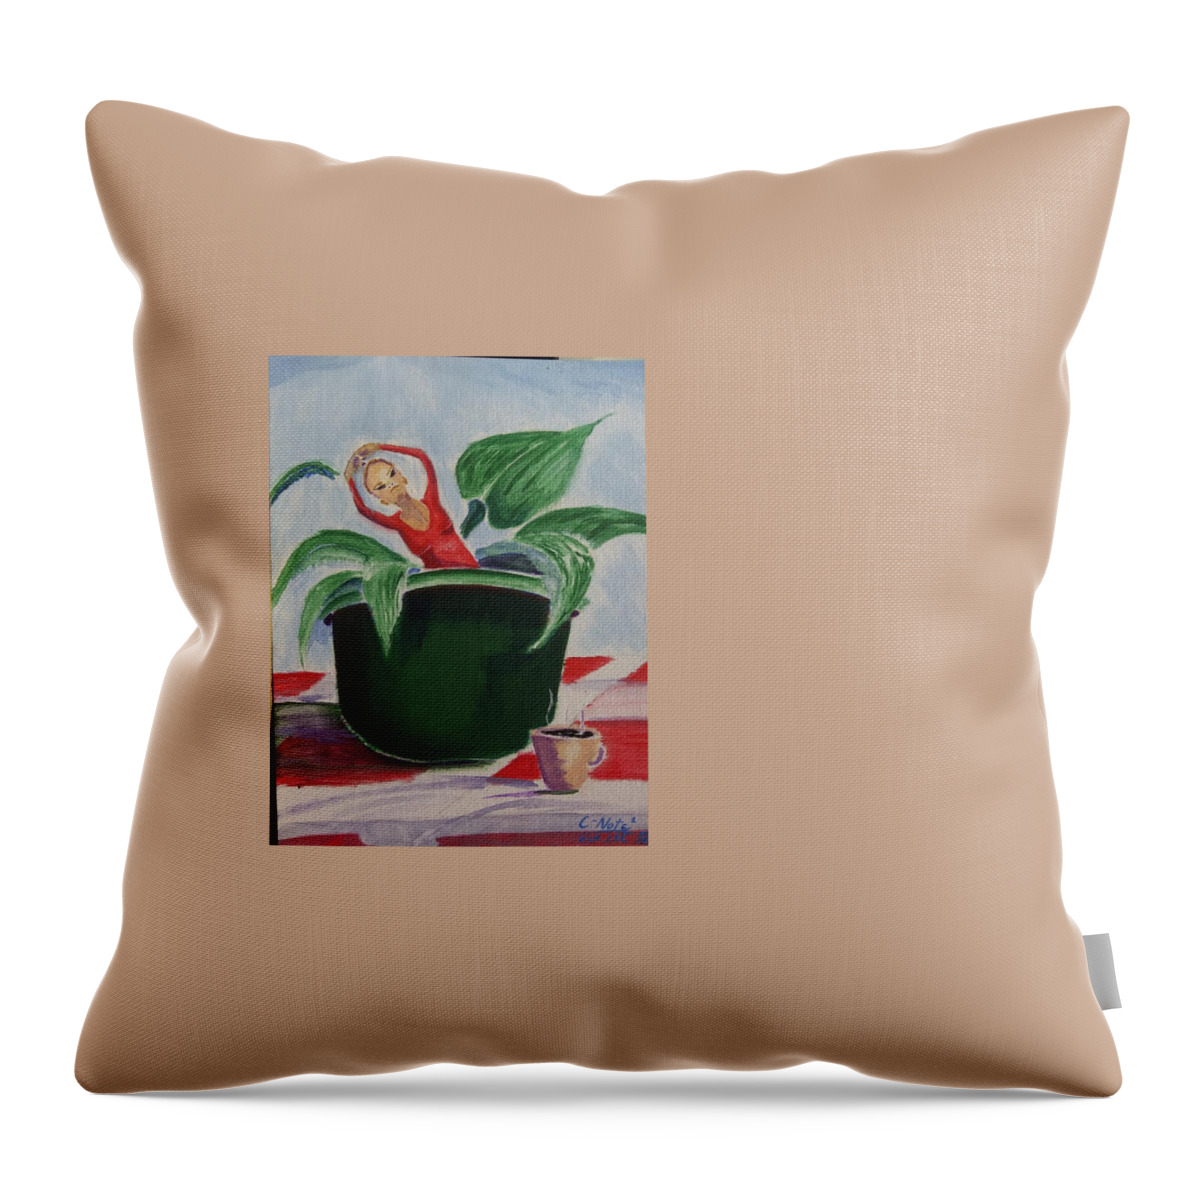 Black Art Throw Pillow featuring the drawing Untitled 115 by Donald C-Note Hooker